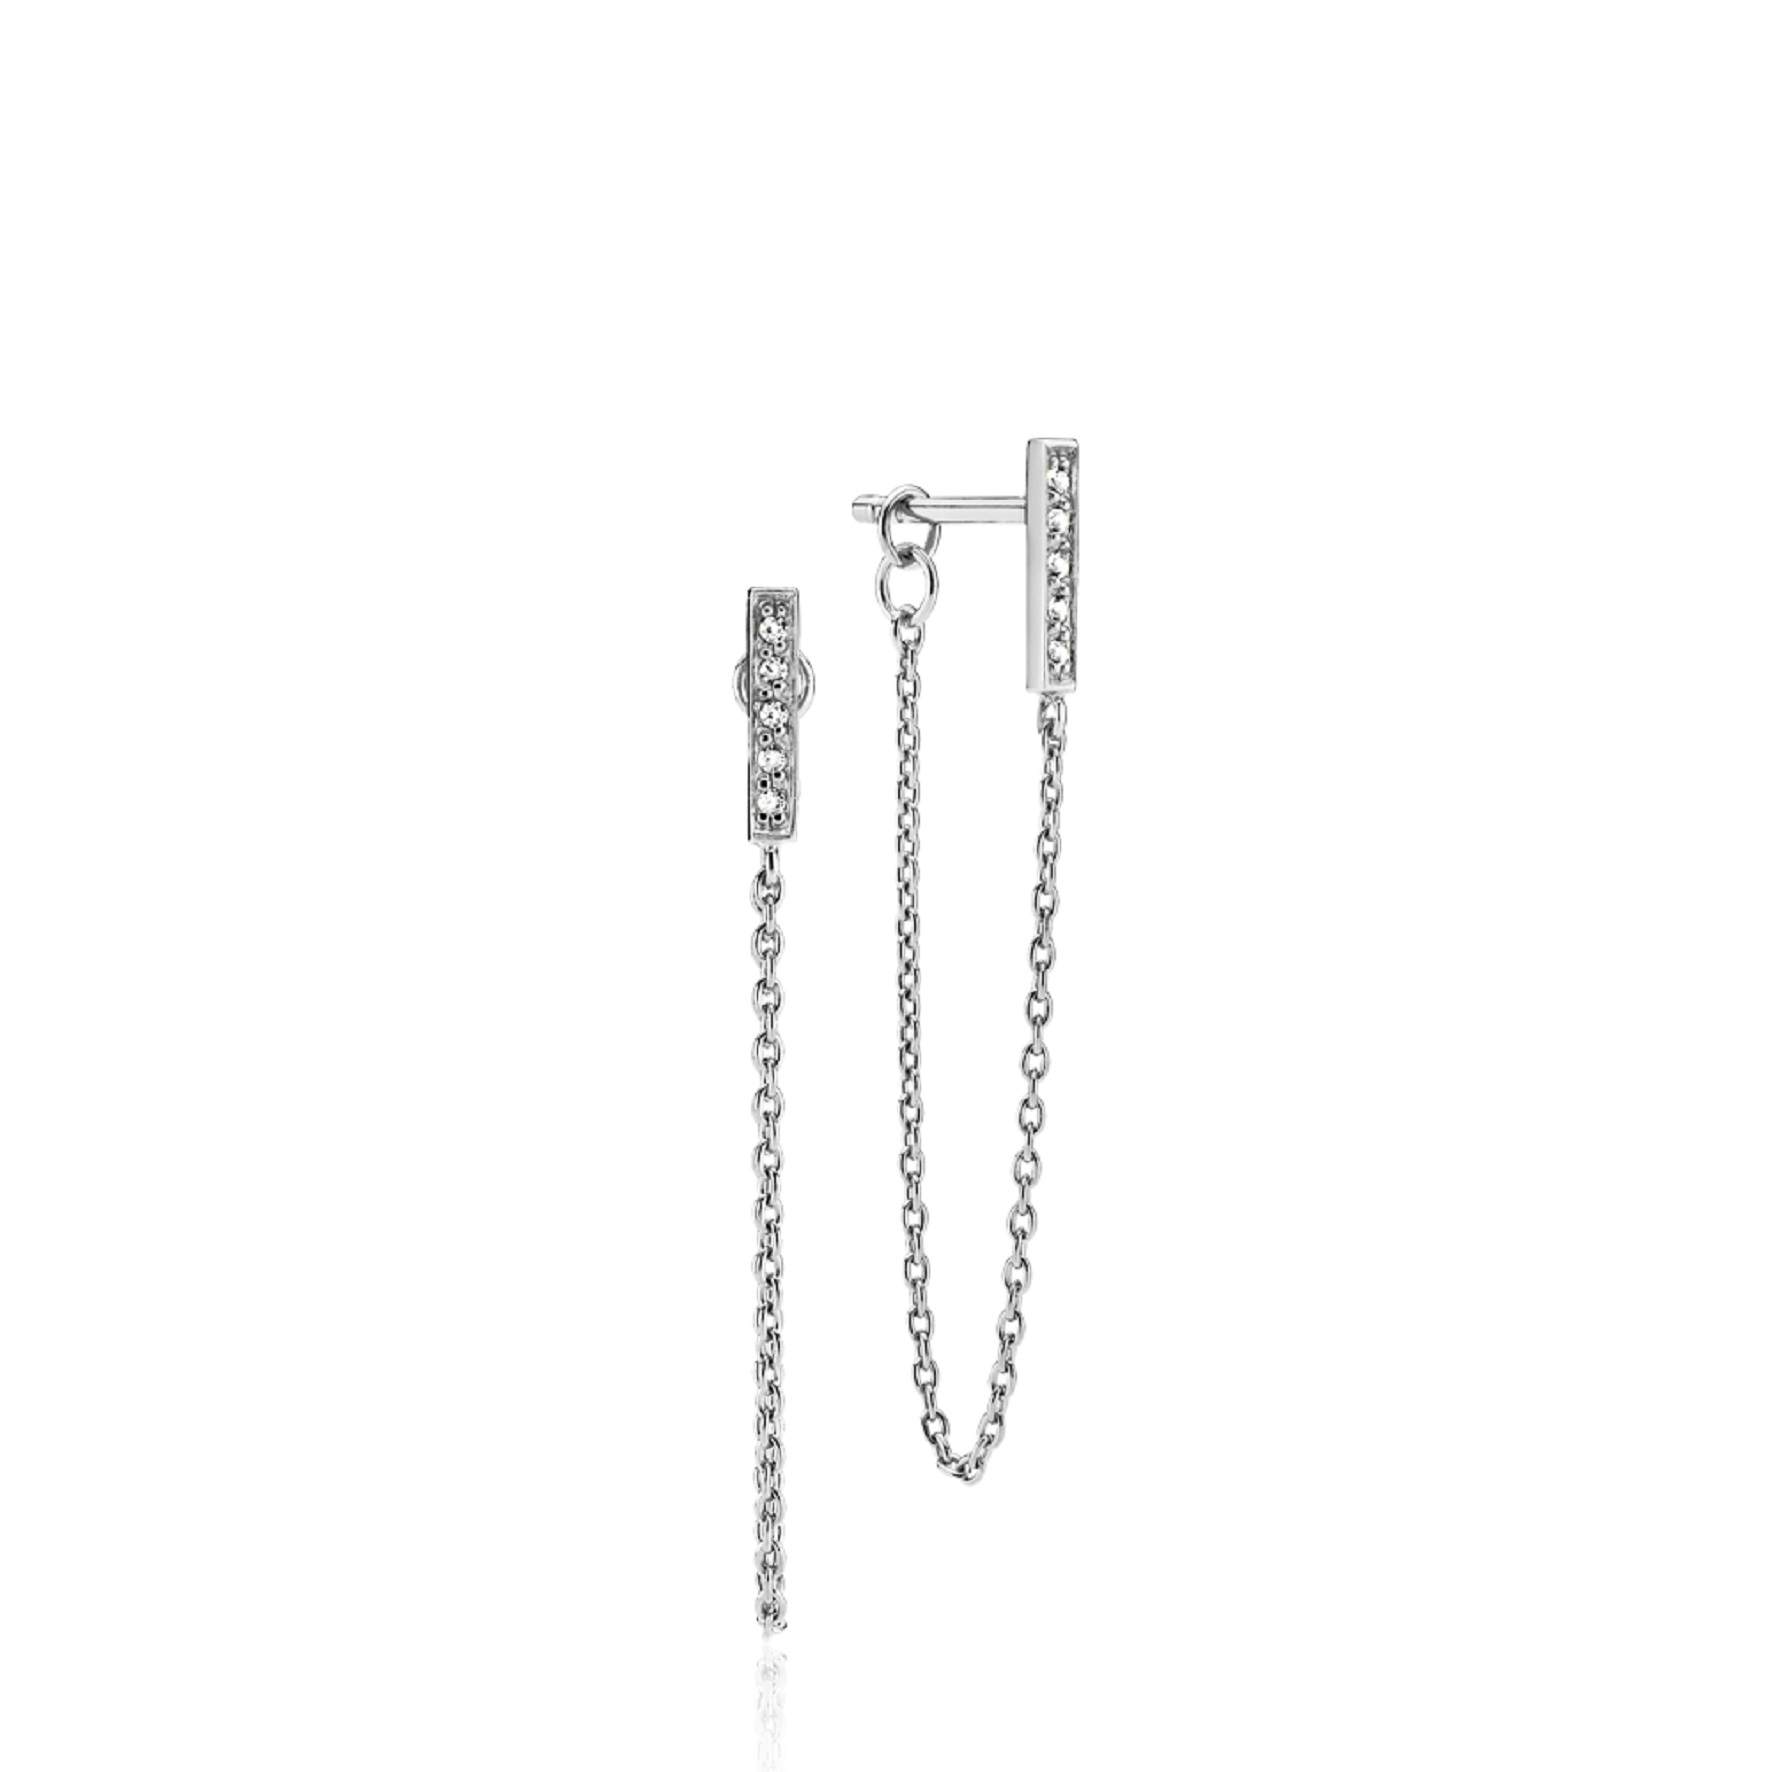 Brilliant Earchains from Sistie in Silver Sterling 925